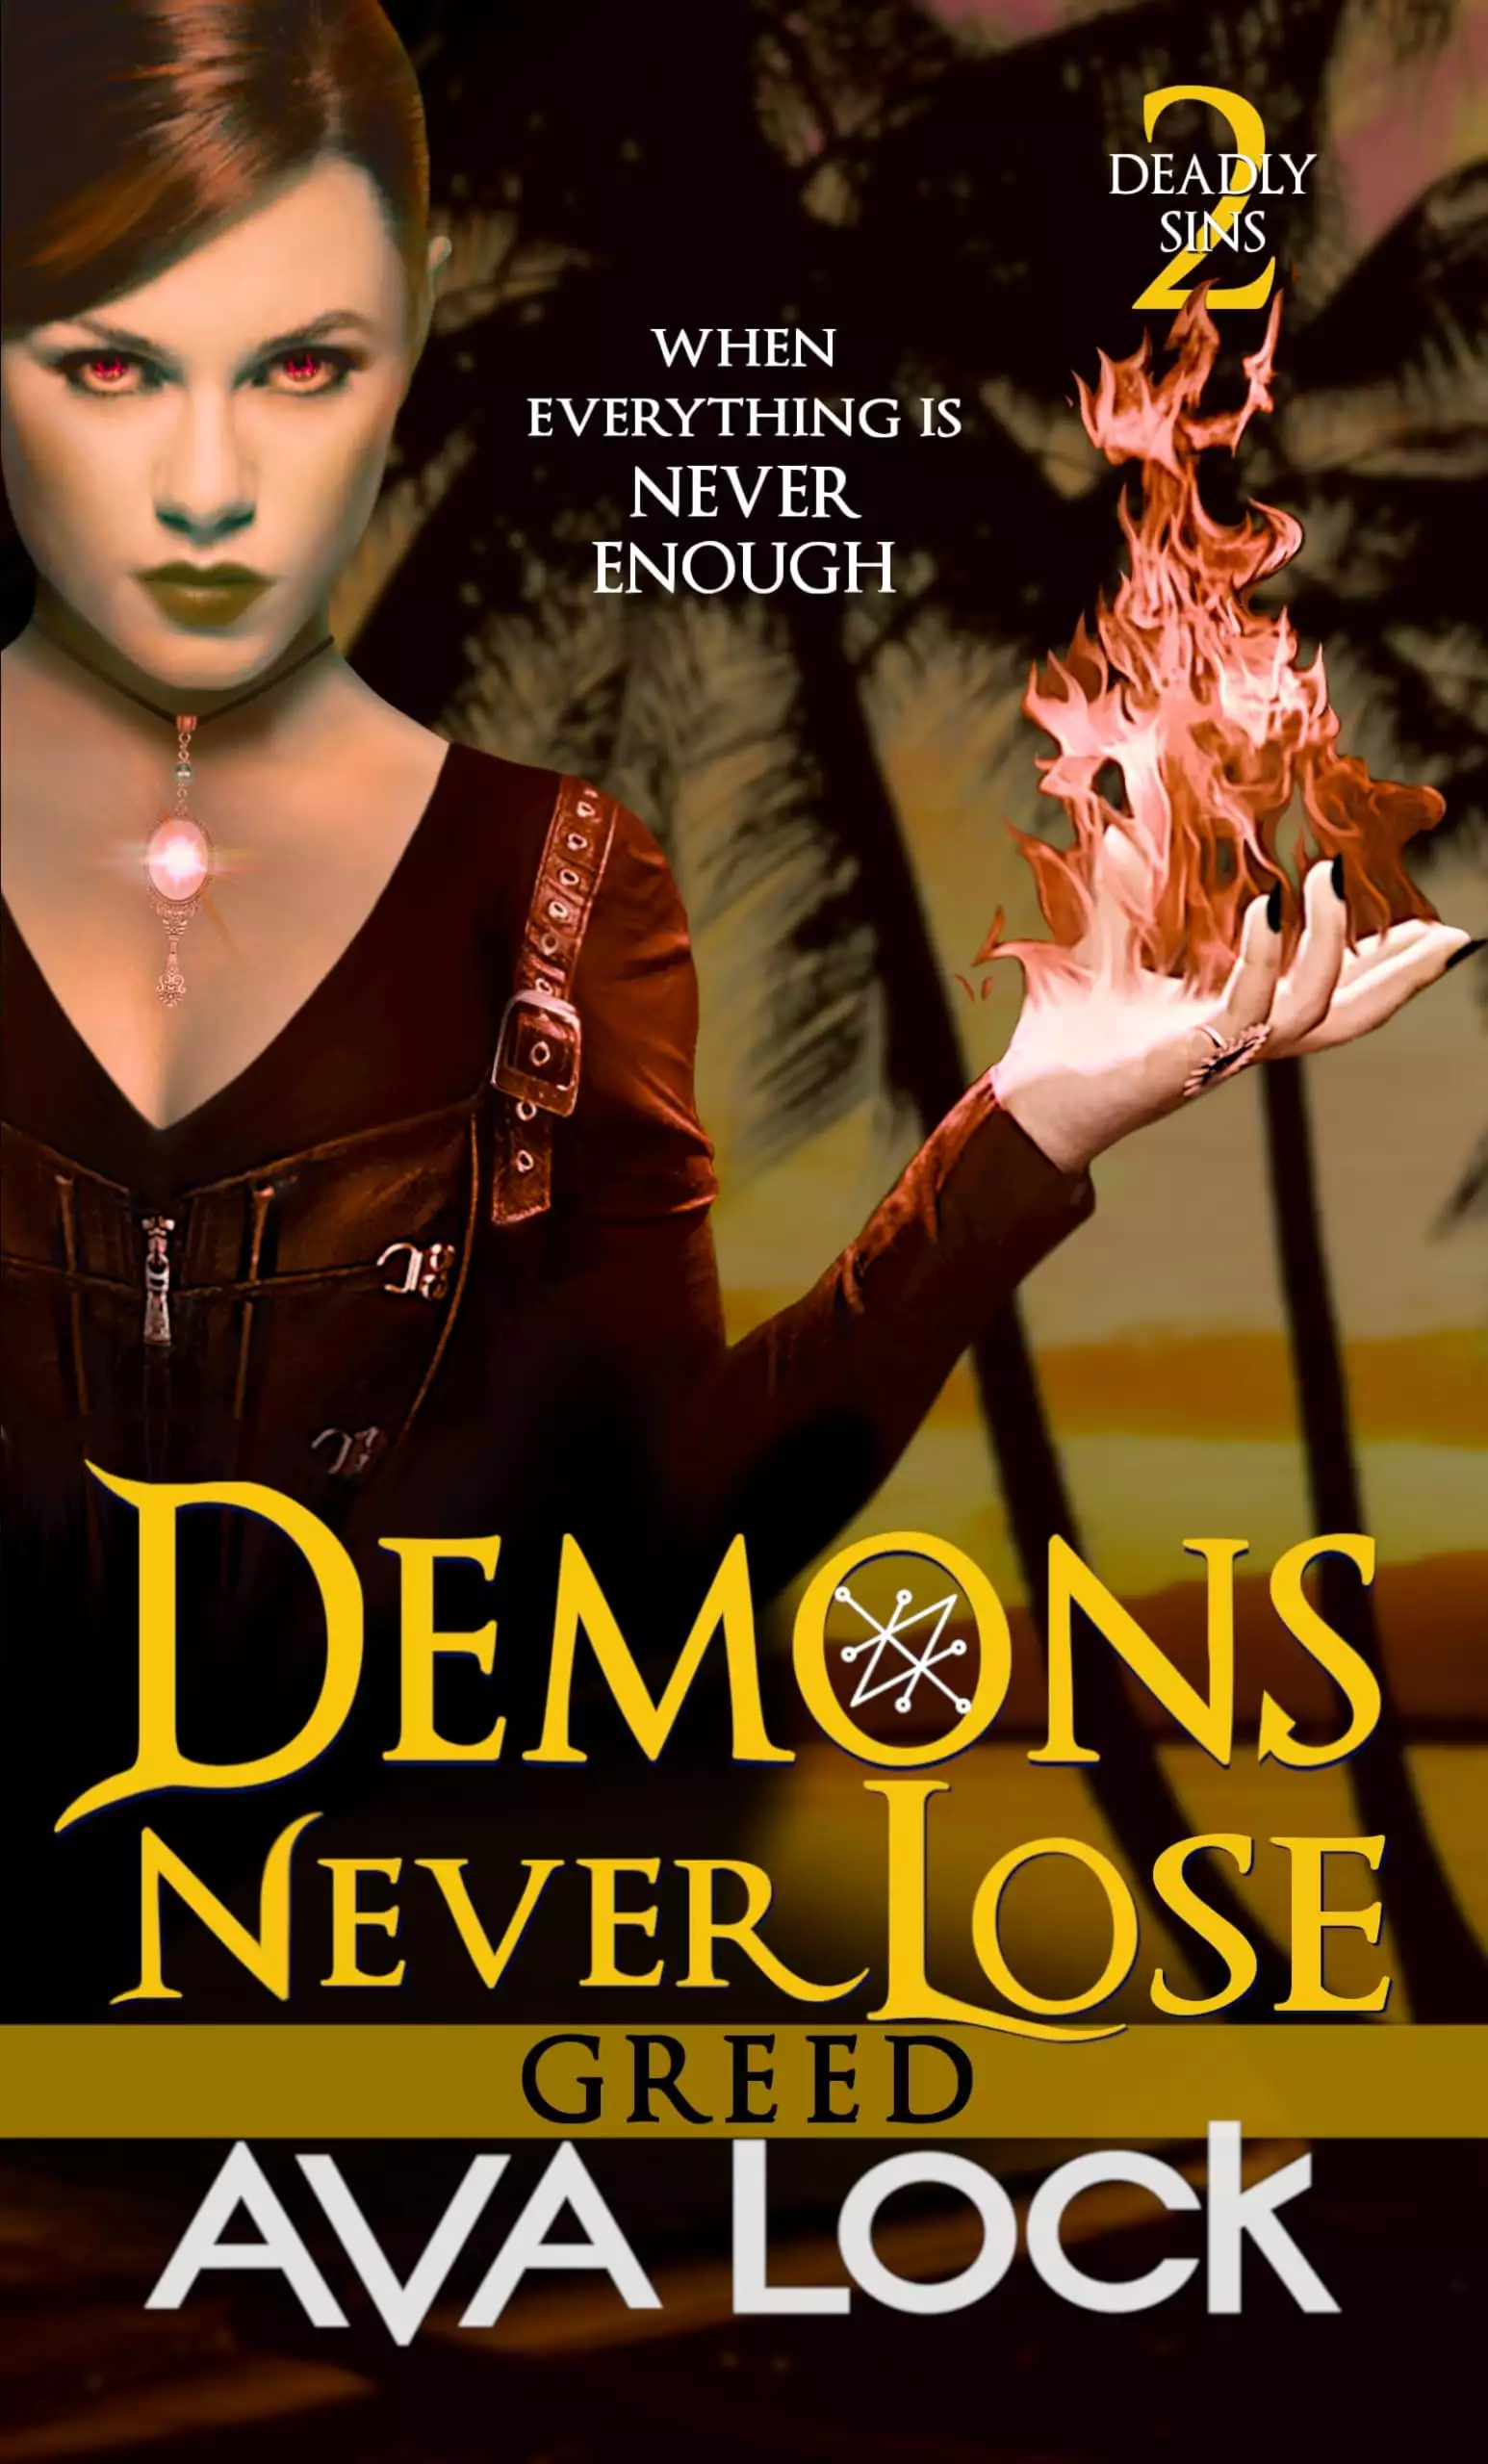 Demons Never Lose: Greed